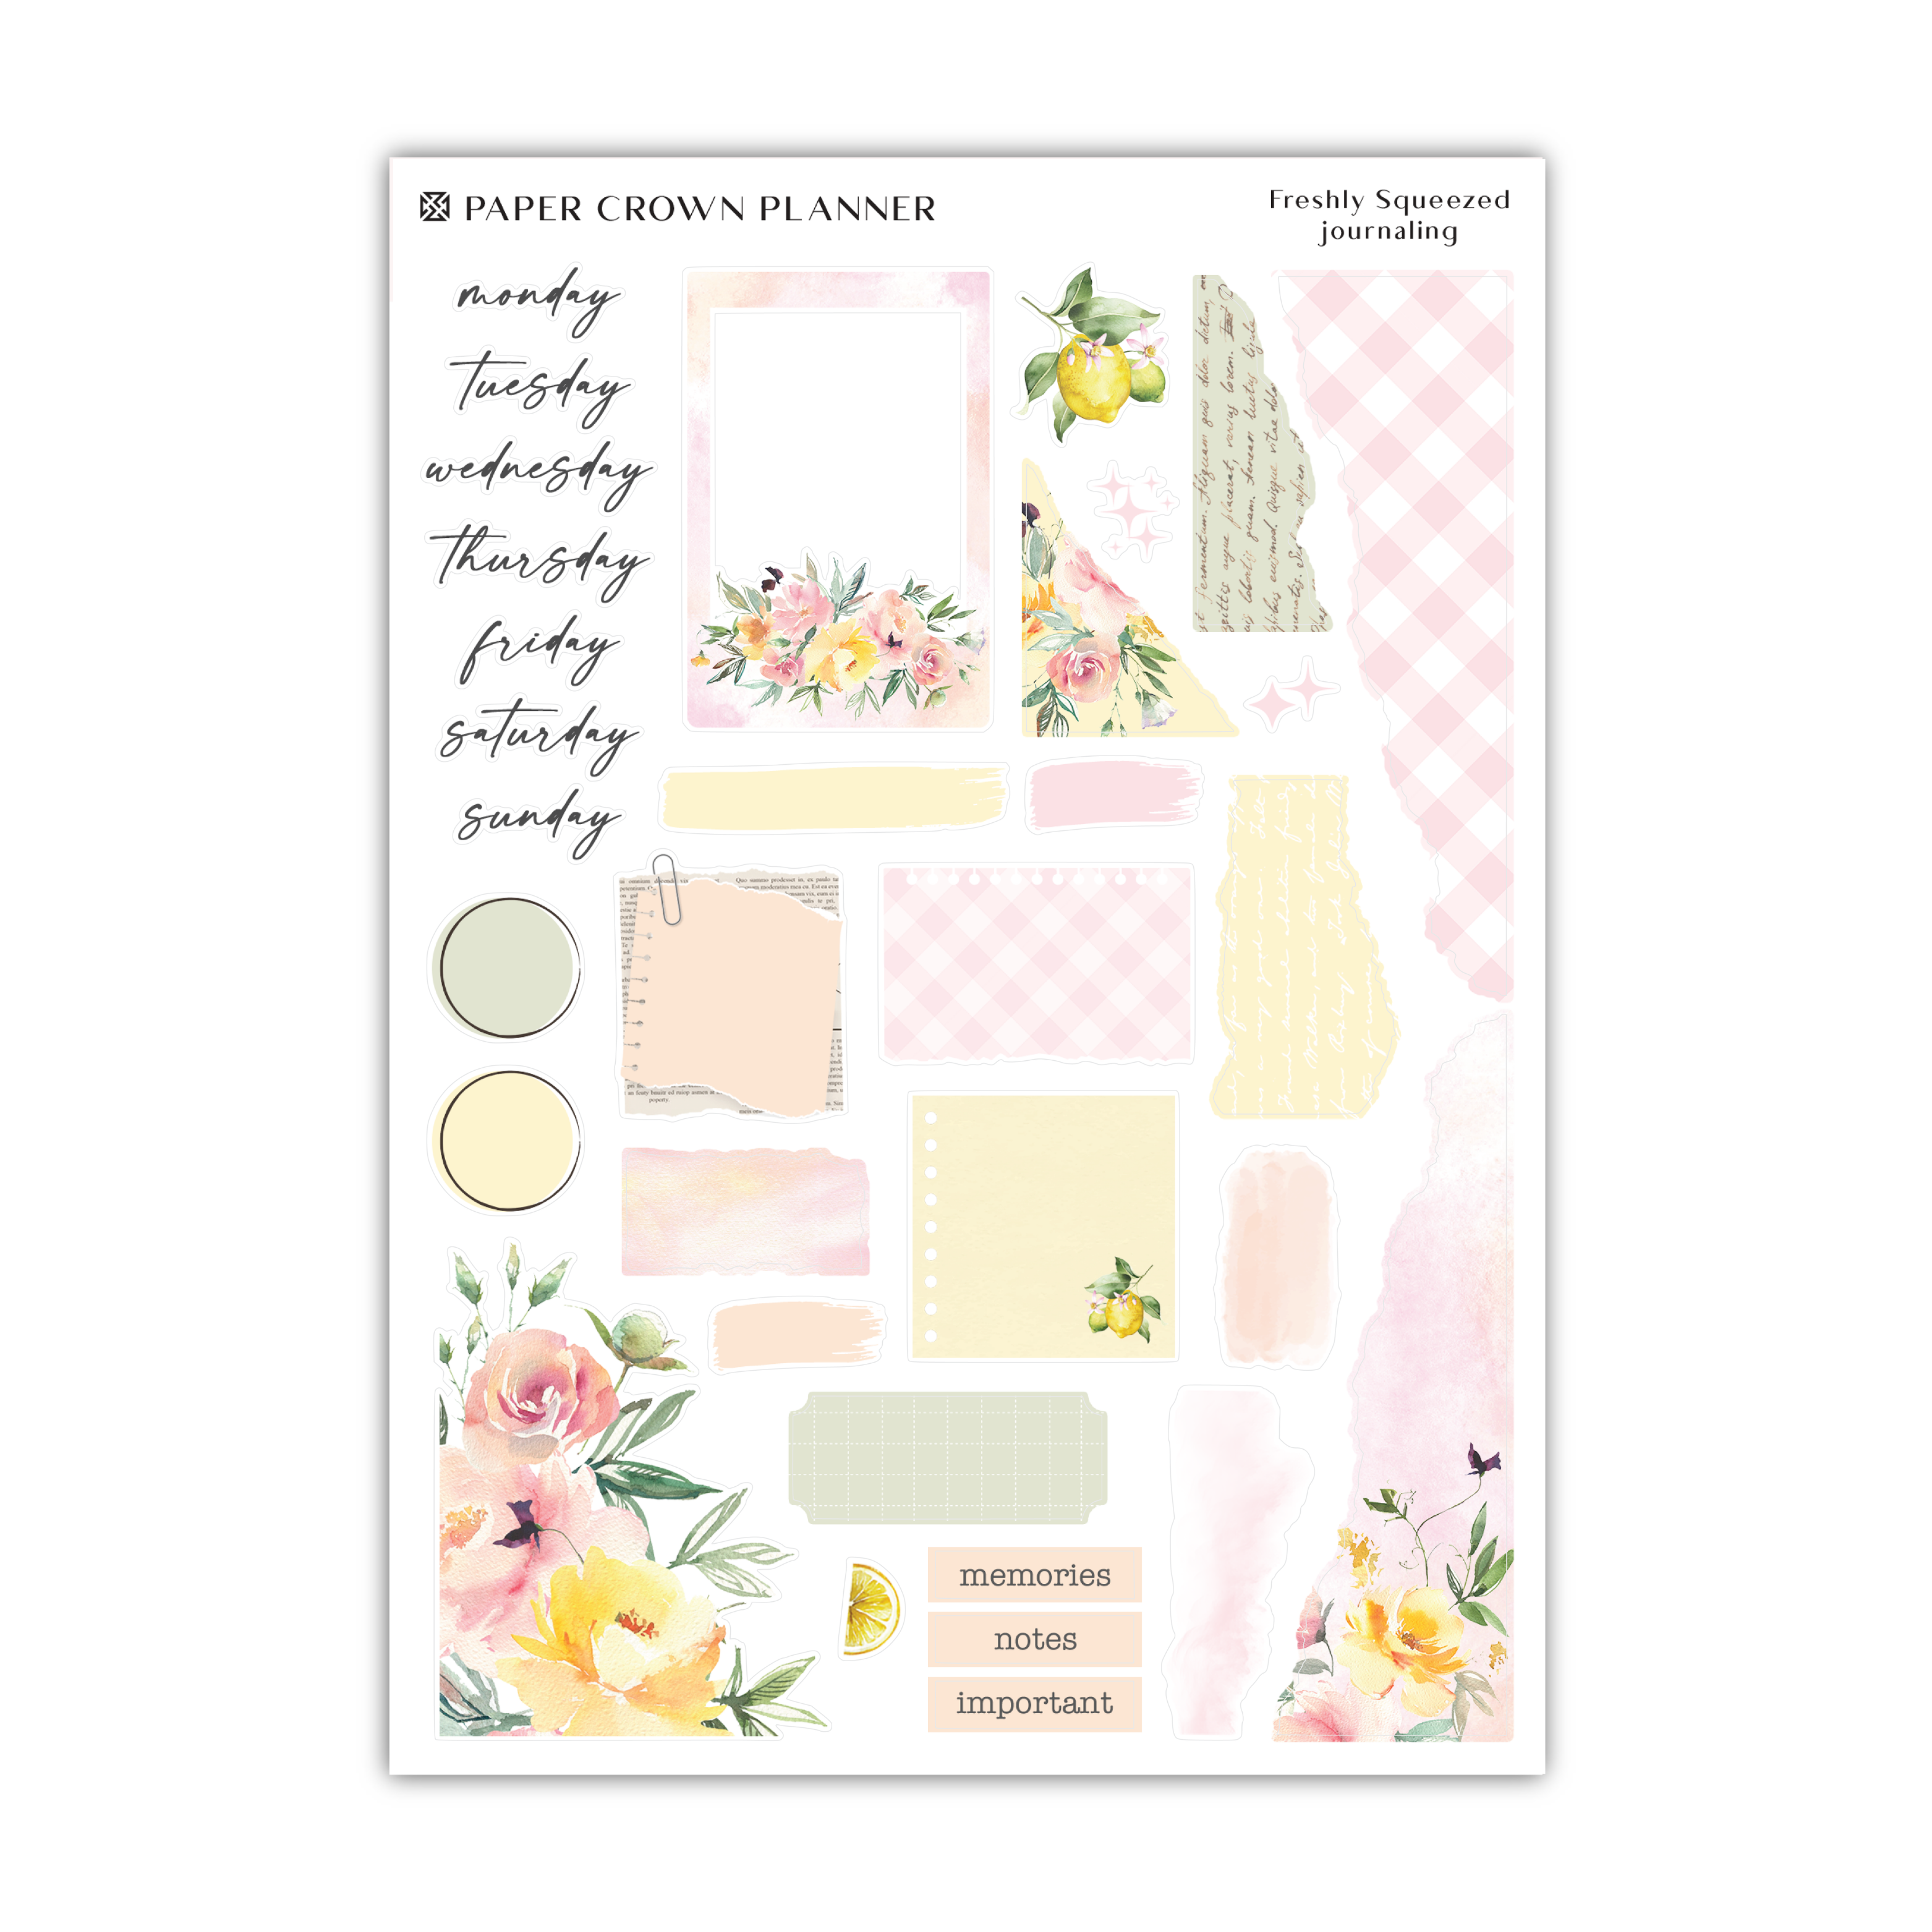 a paper crown planner sticker with flowers